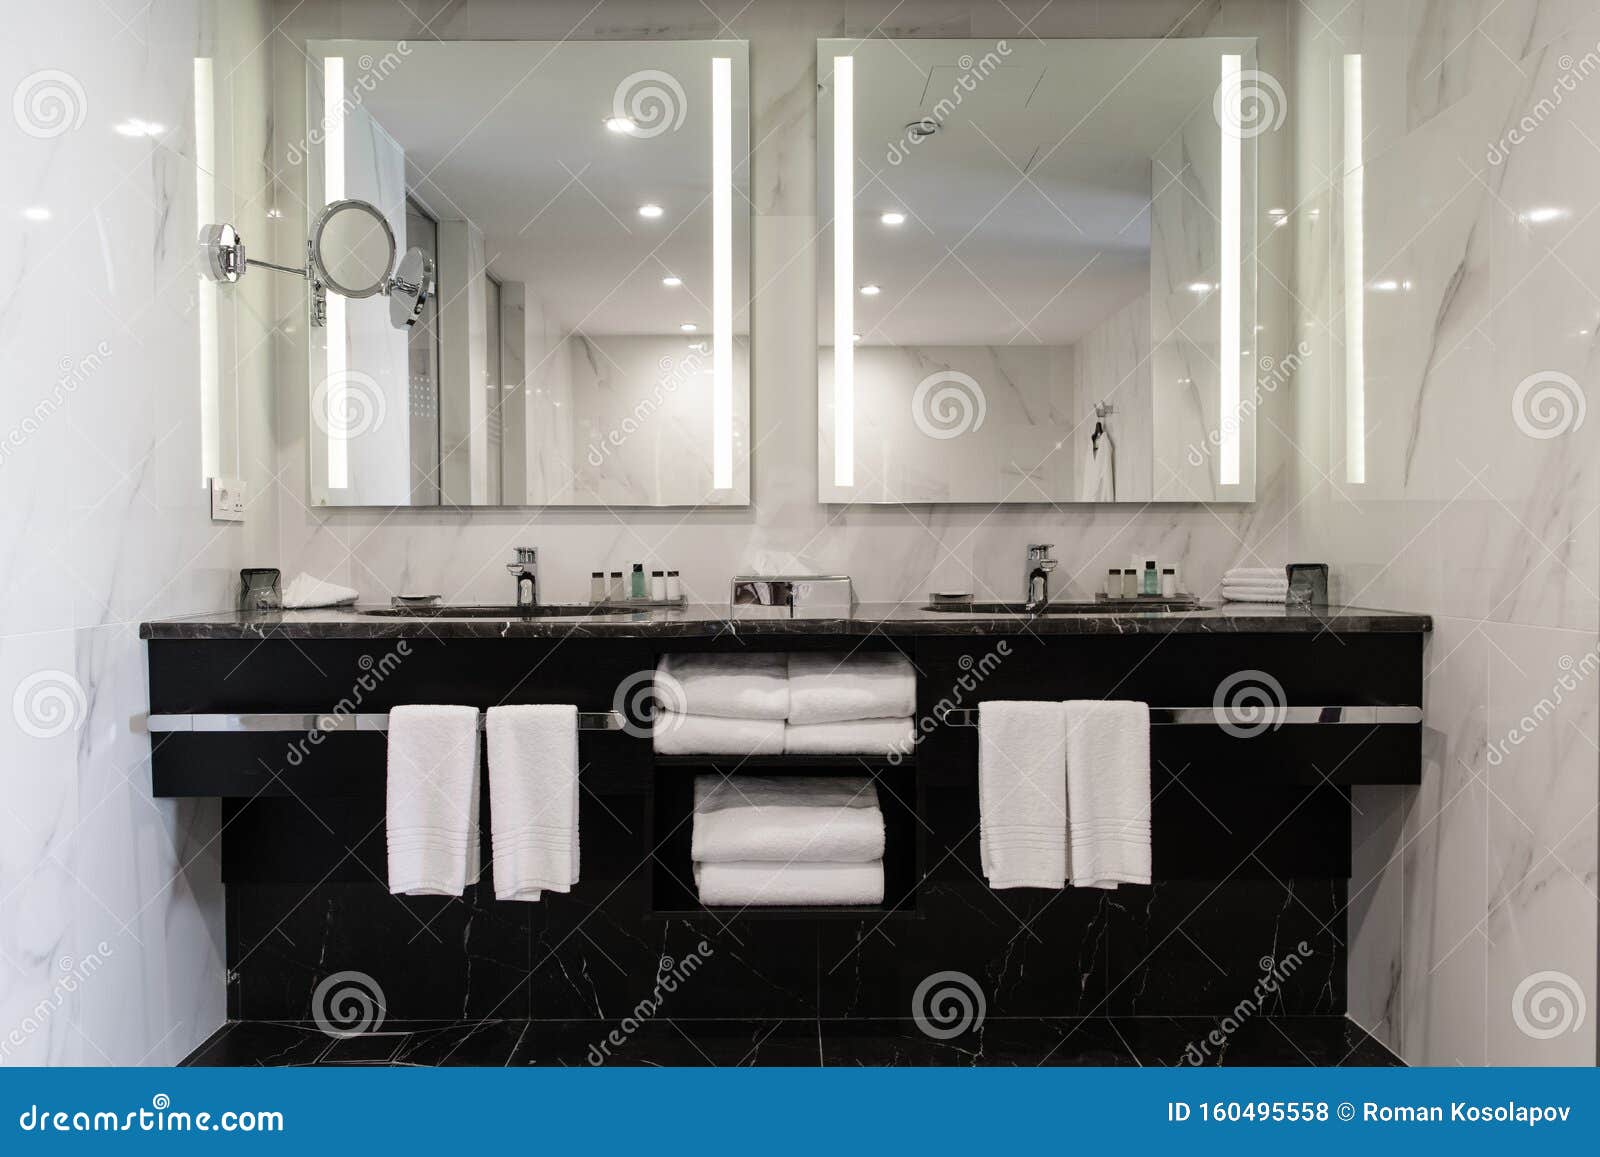 stylish twin bathroom with two sinks and mirror.